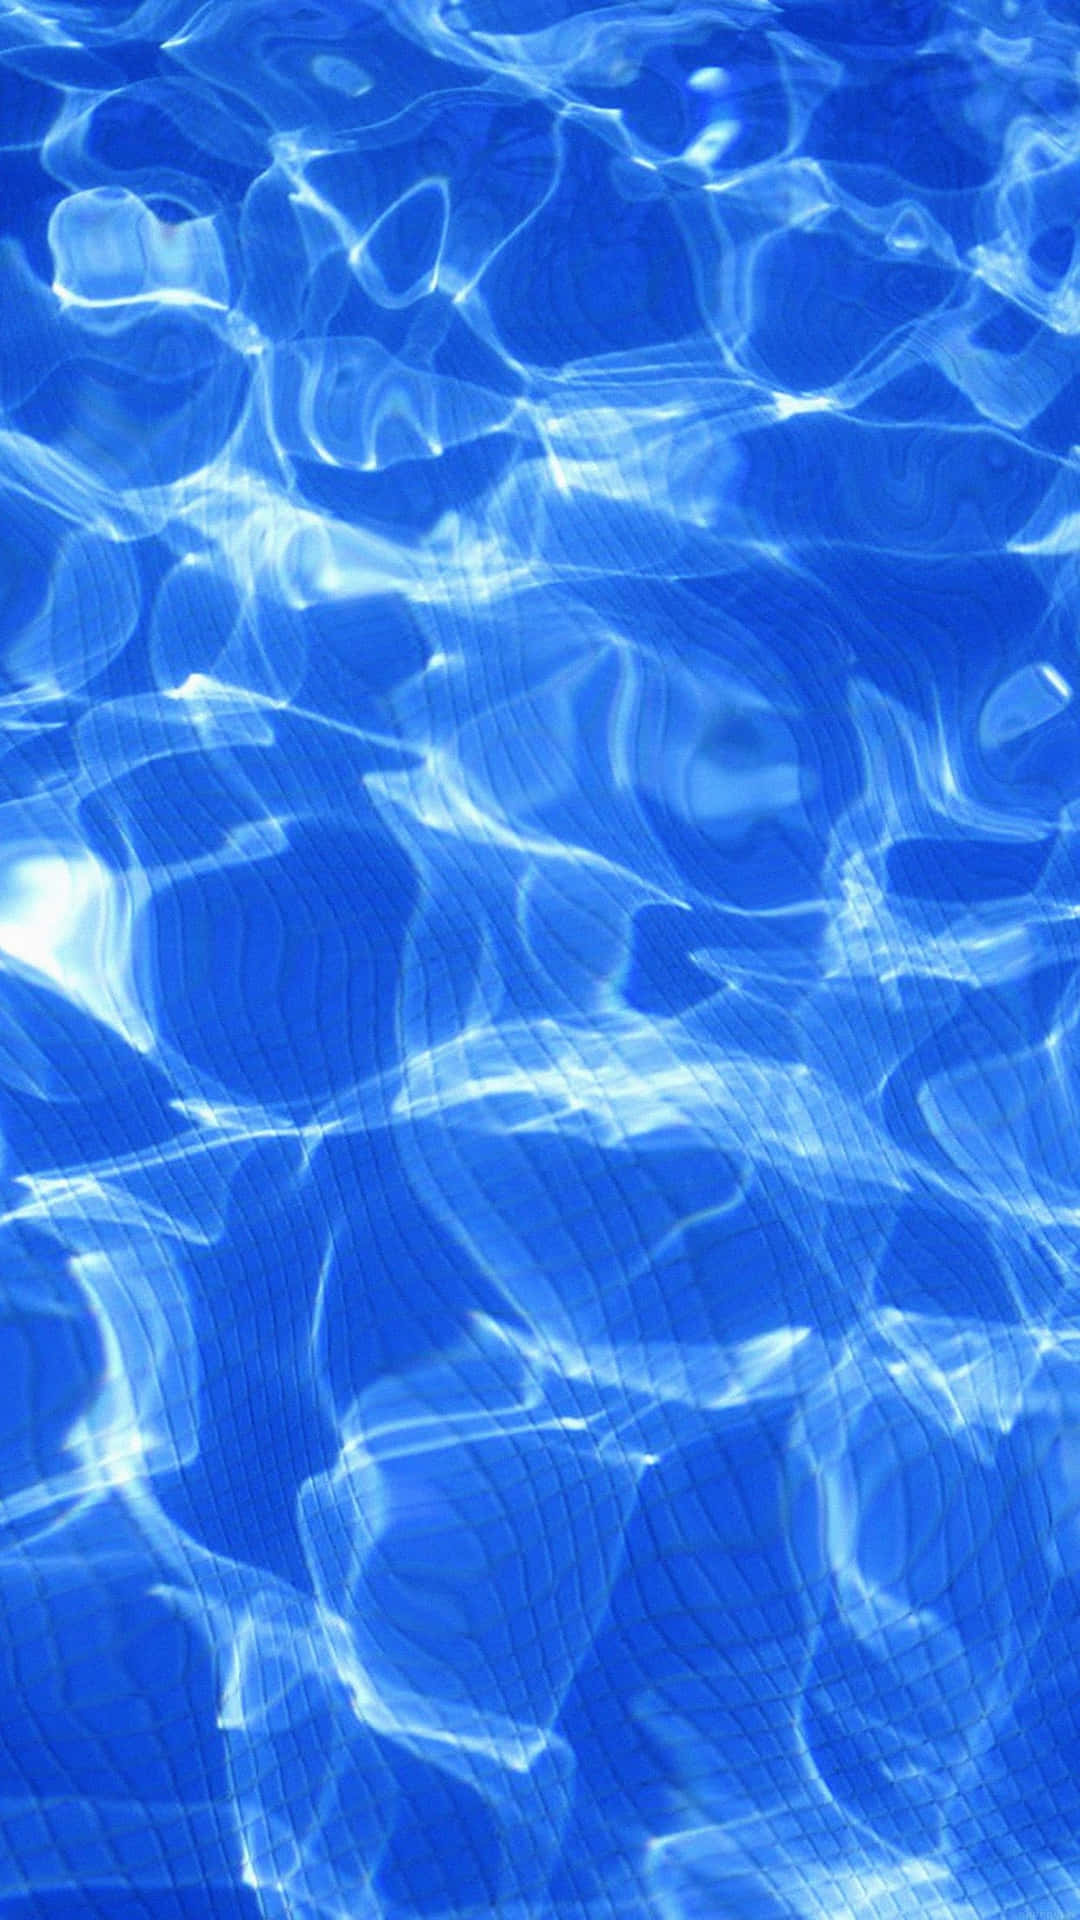 A Blue Pool With Ripples In The Water Wallpaper